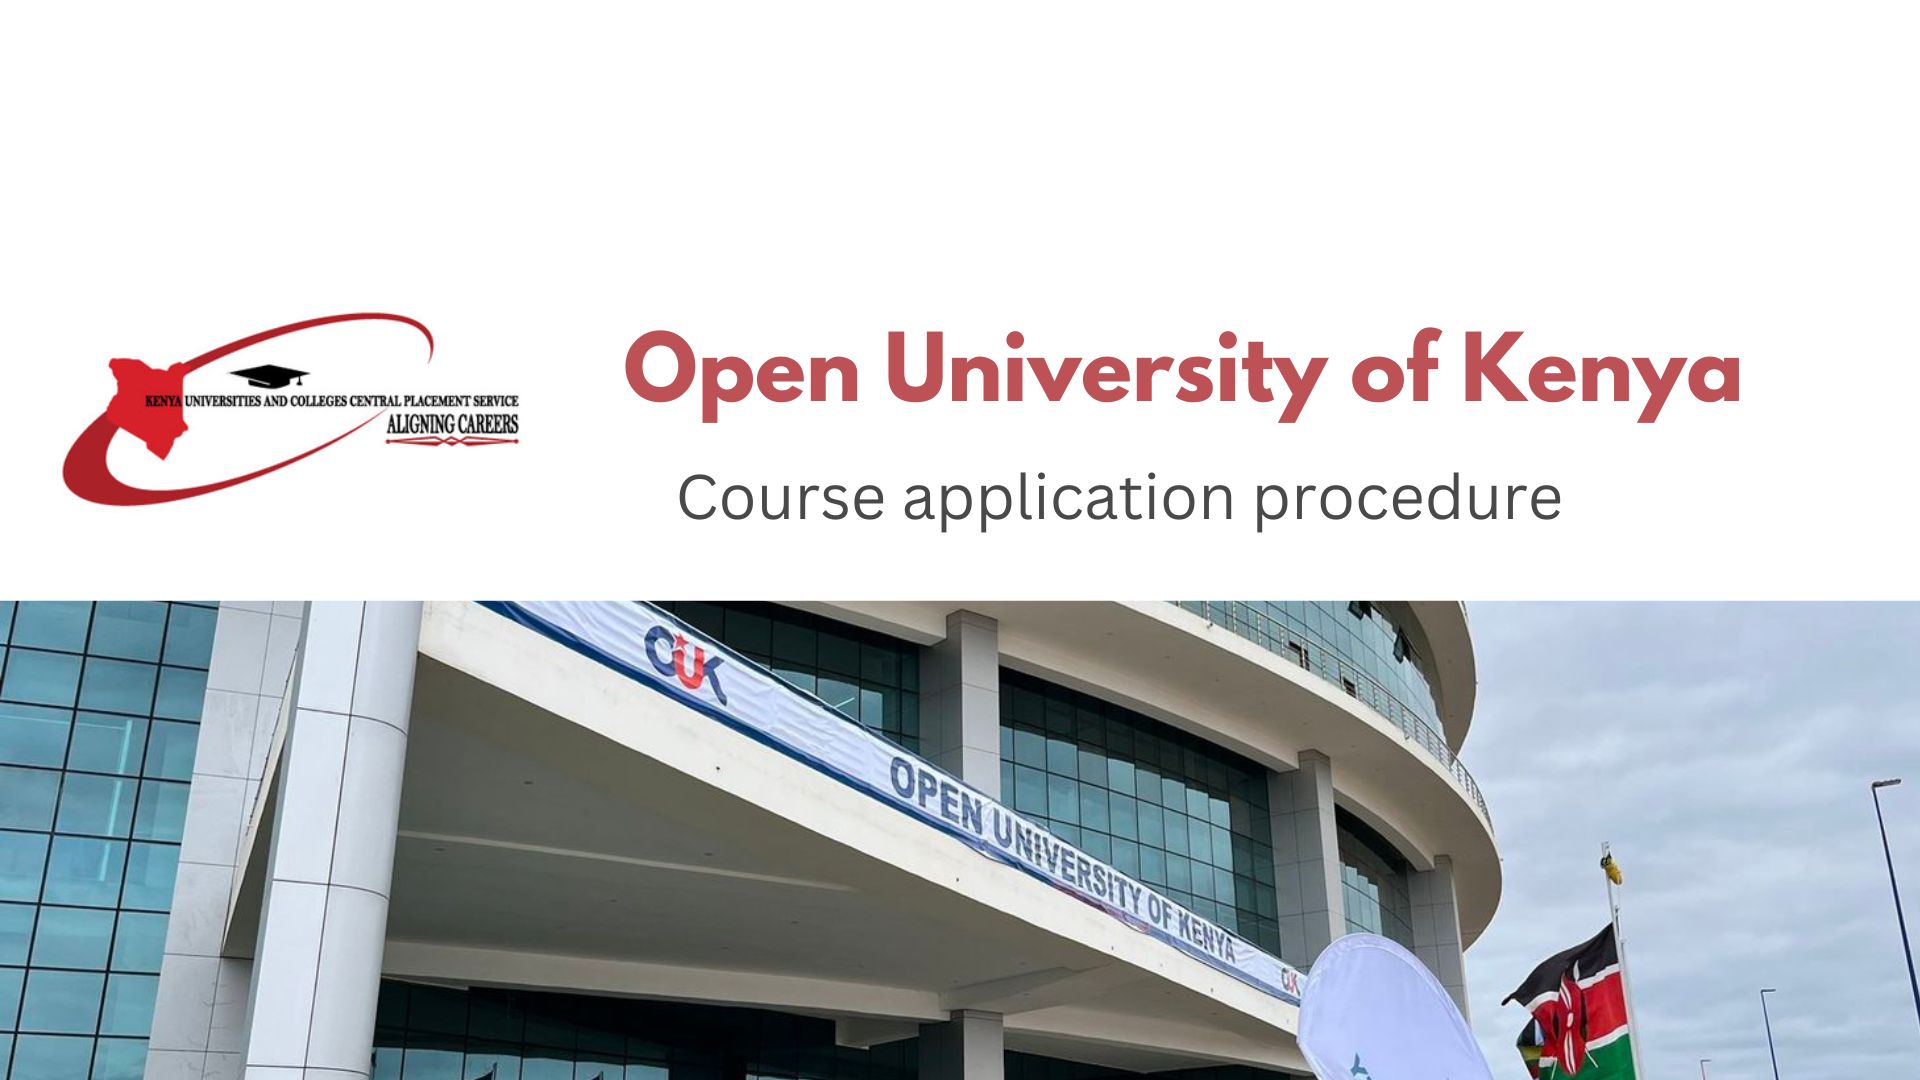 How to apply for Open University of Kenya course via KUCCPS portal